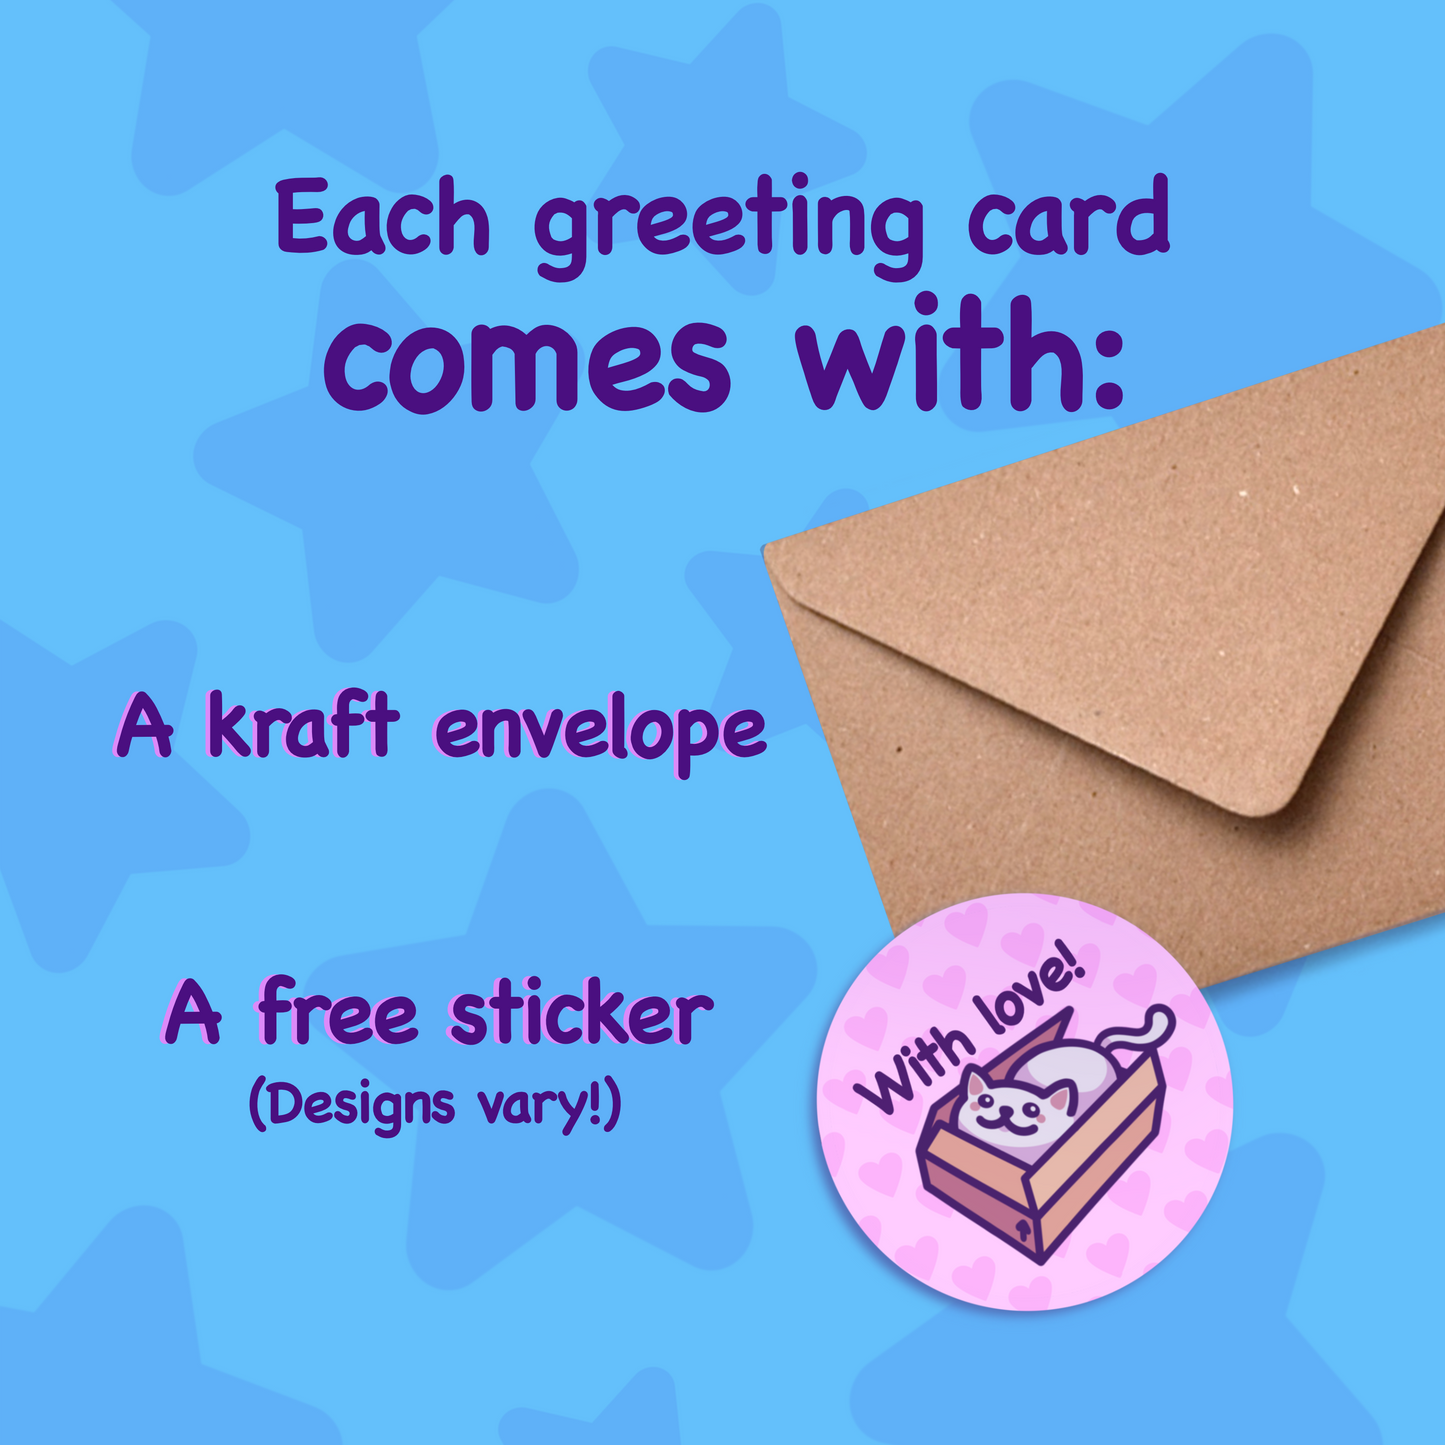  Each handmade greeting card comes with a kraft envelope and a free sticker (designs vary).